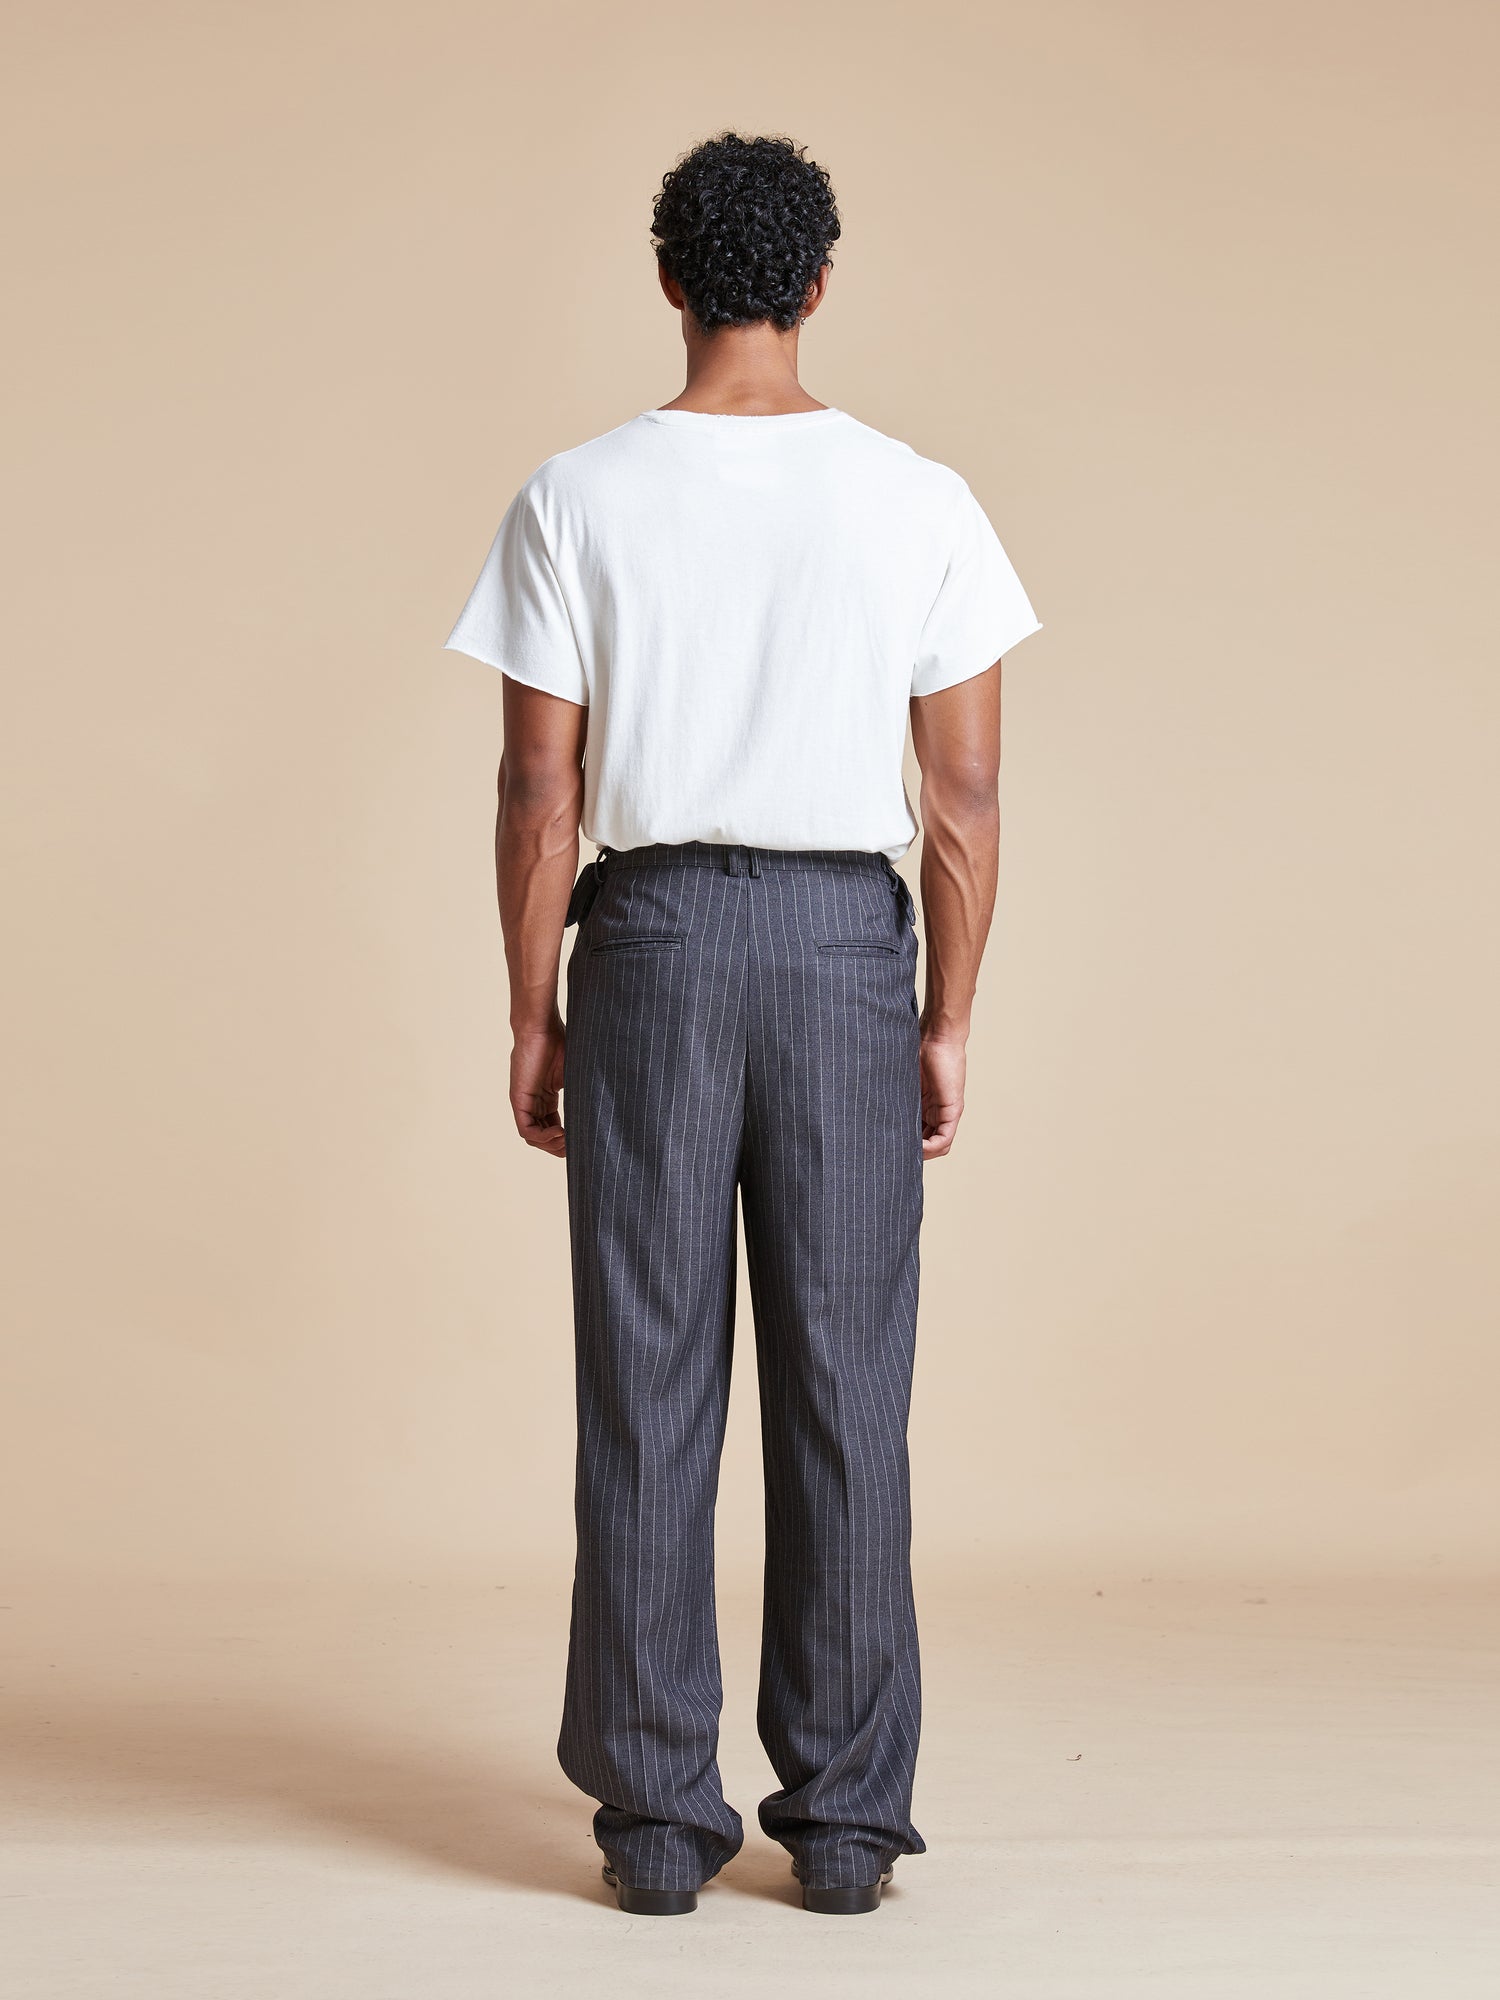 The back view of a man wearing a white t-shirt and Found Pinstripe Pleated Trousers.